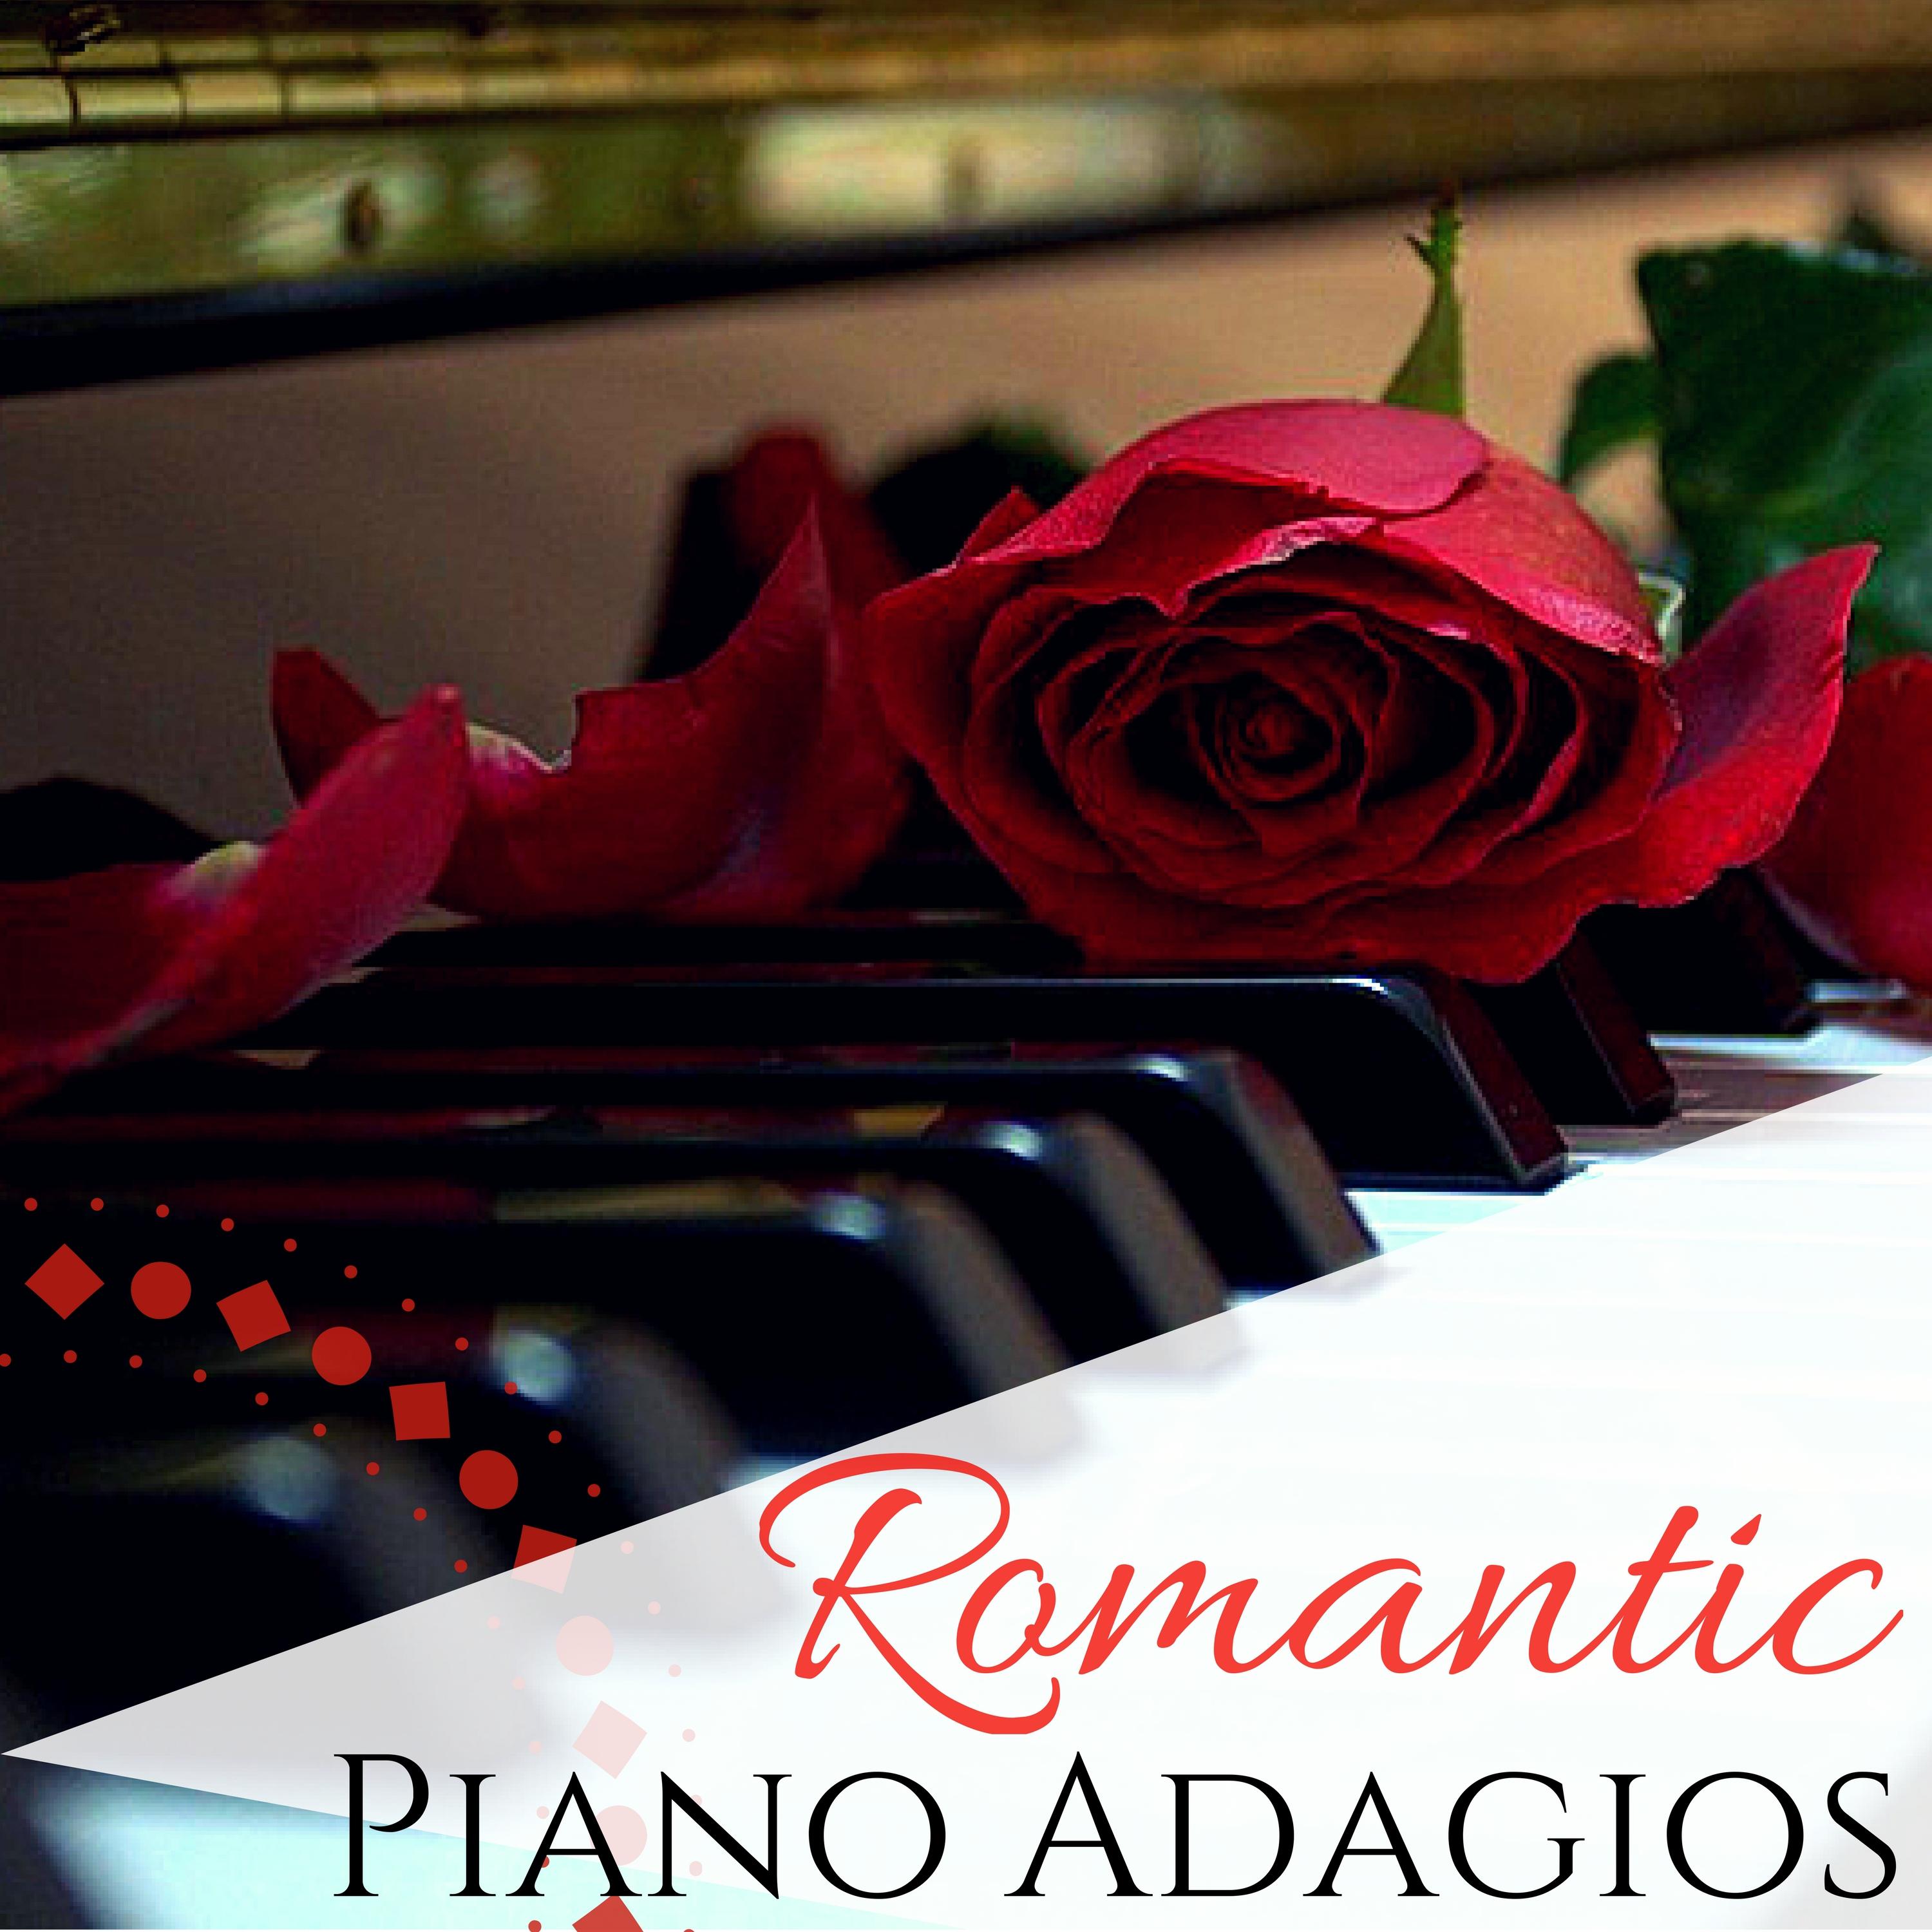 Romantic Piano Adagios - Instrumental Valentine Day Wedding Songs for Soothing Evening